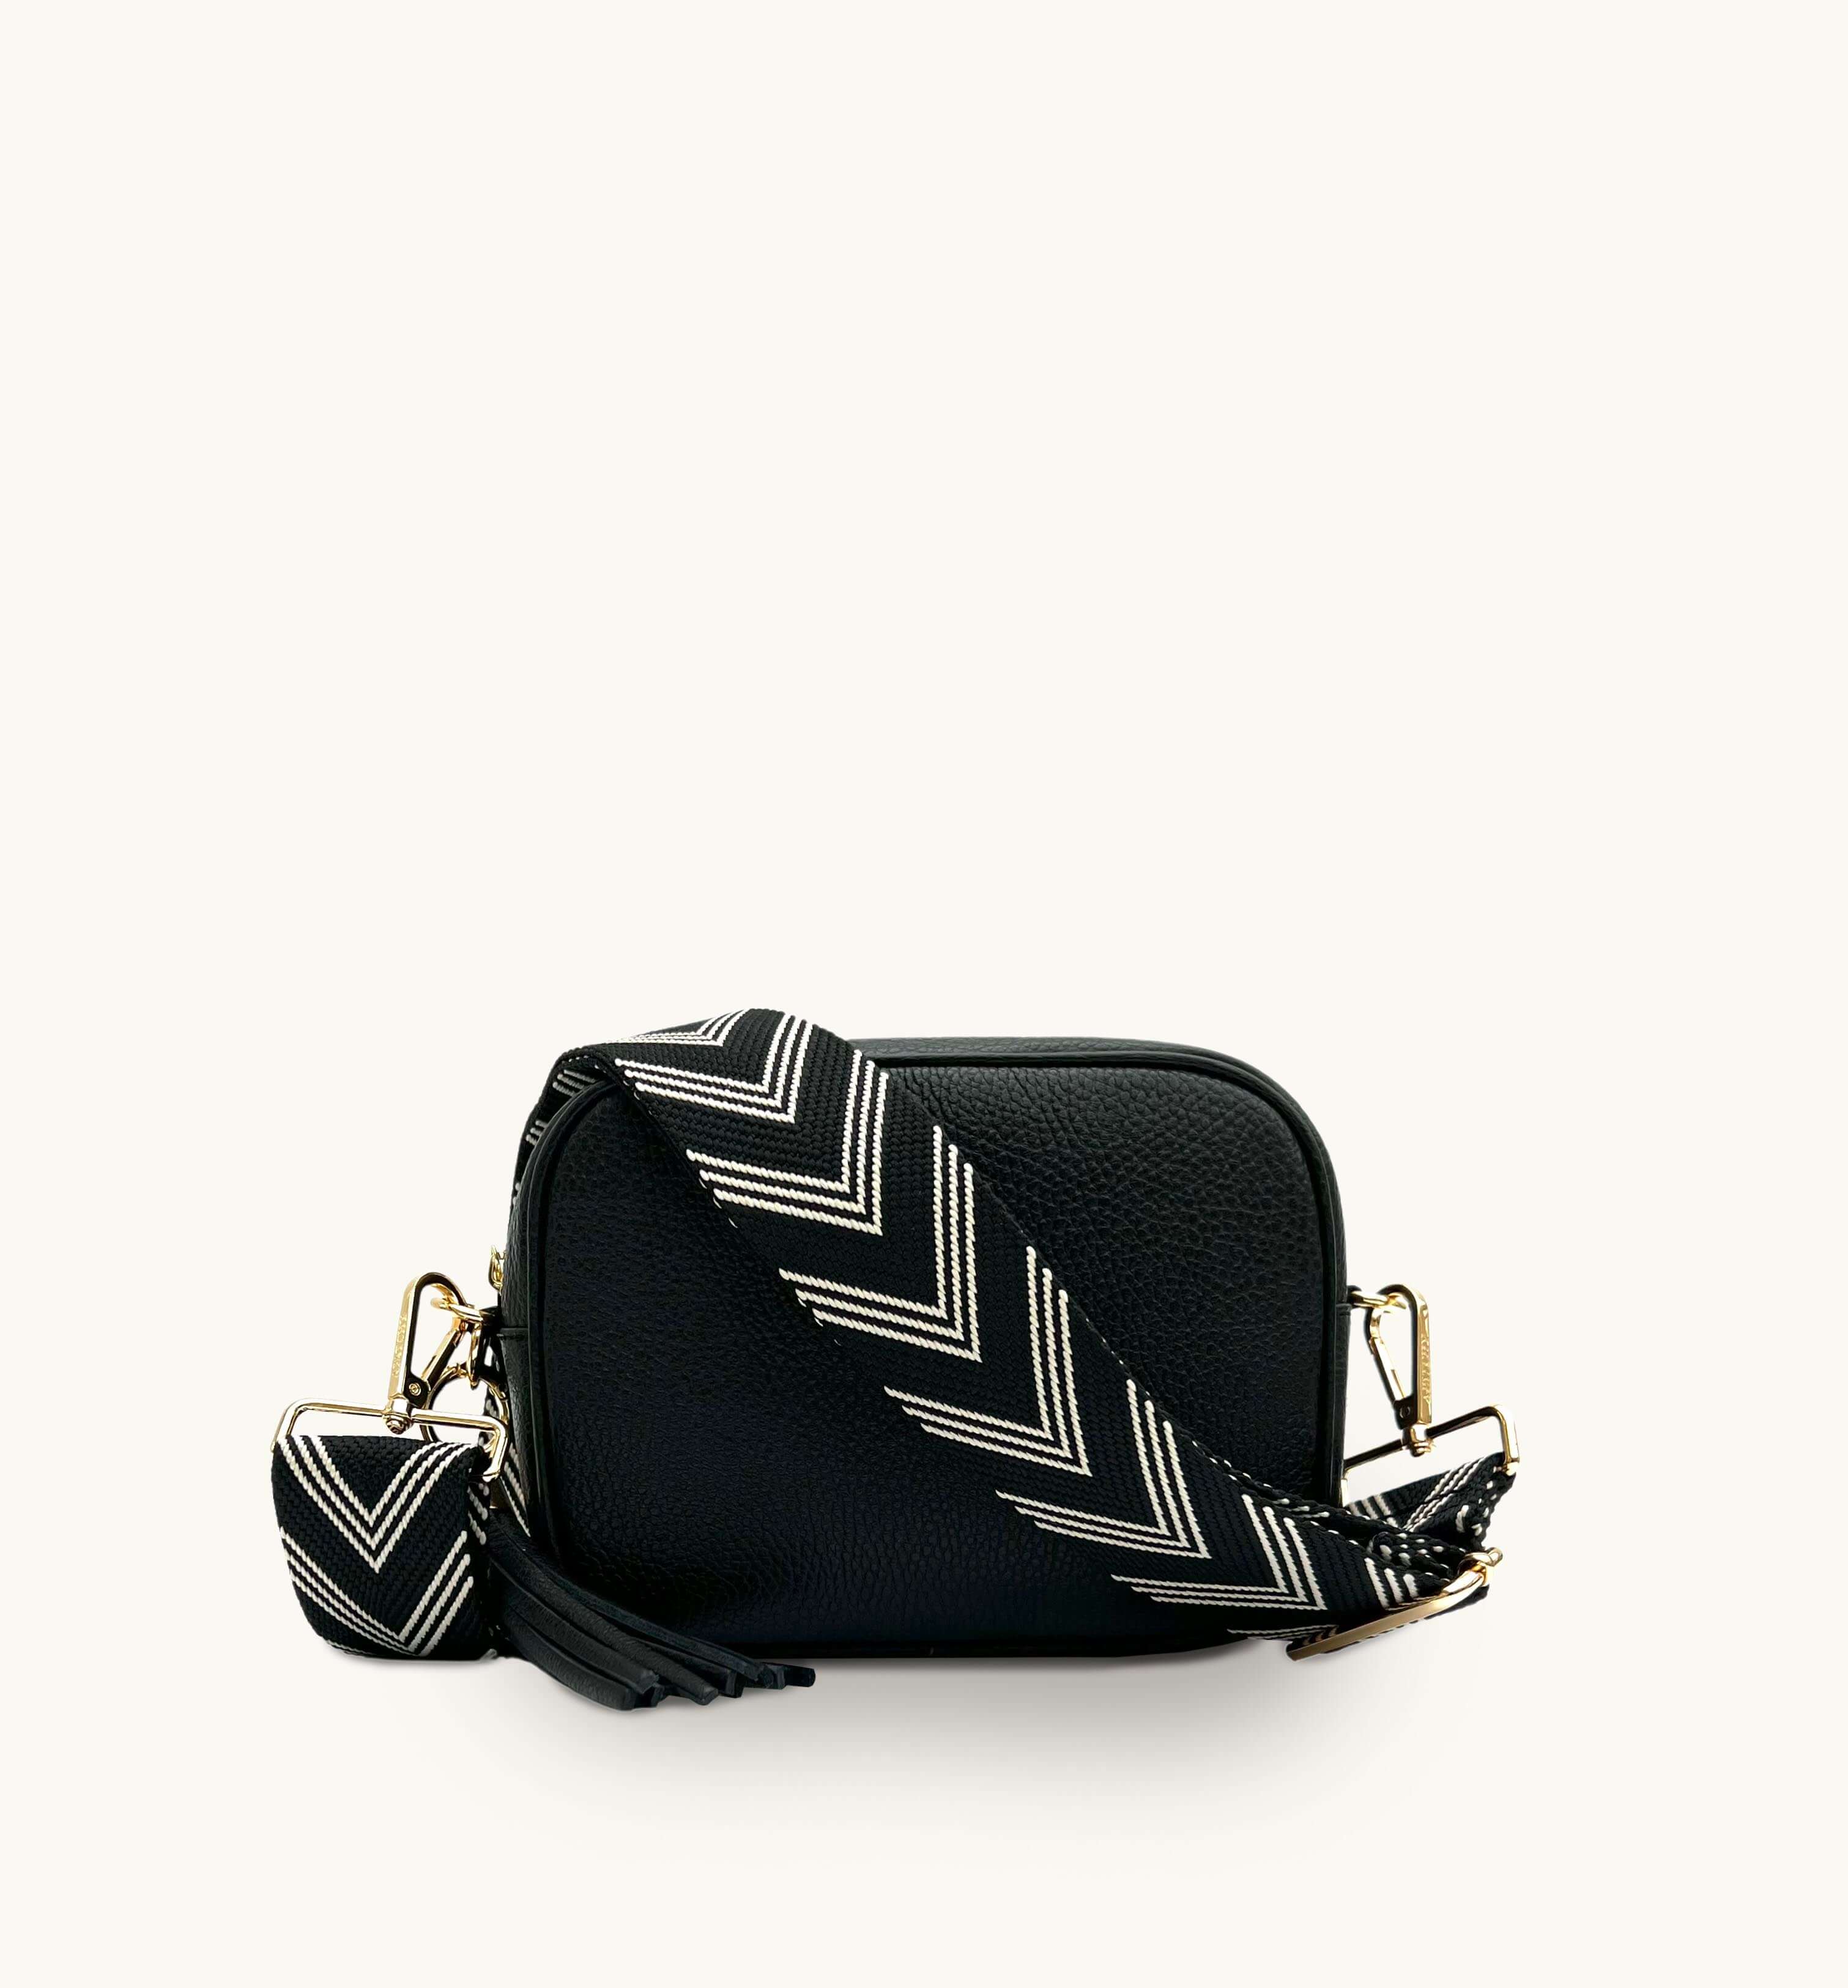 Apatchy Black leather crossbody bag with black and stone arrow strap